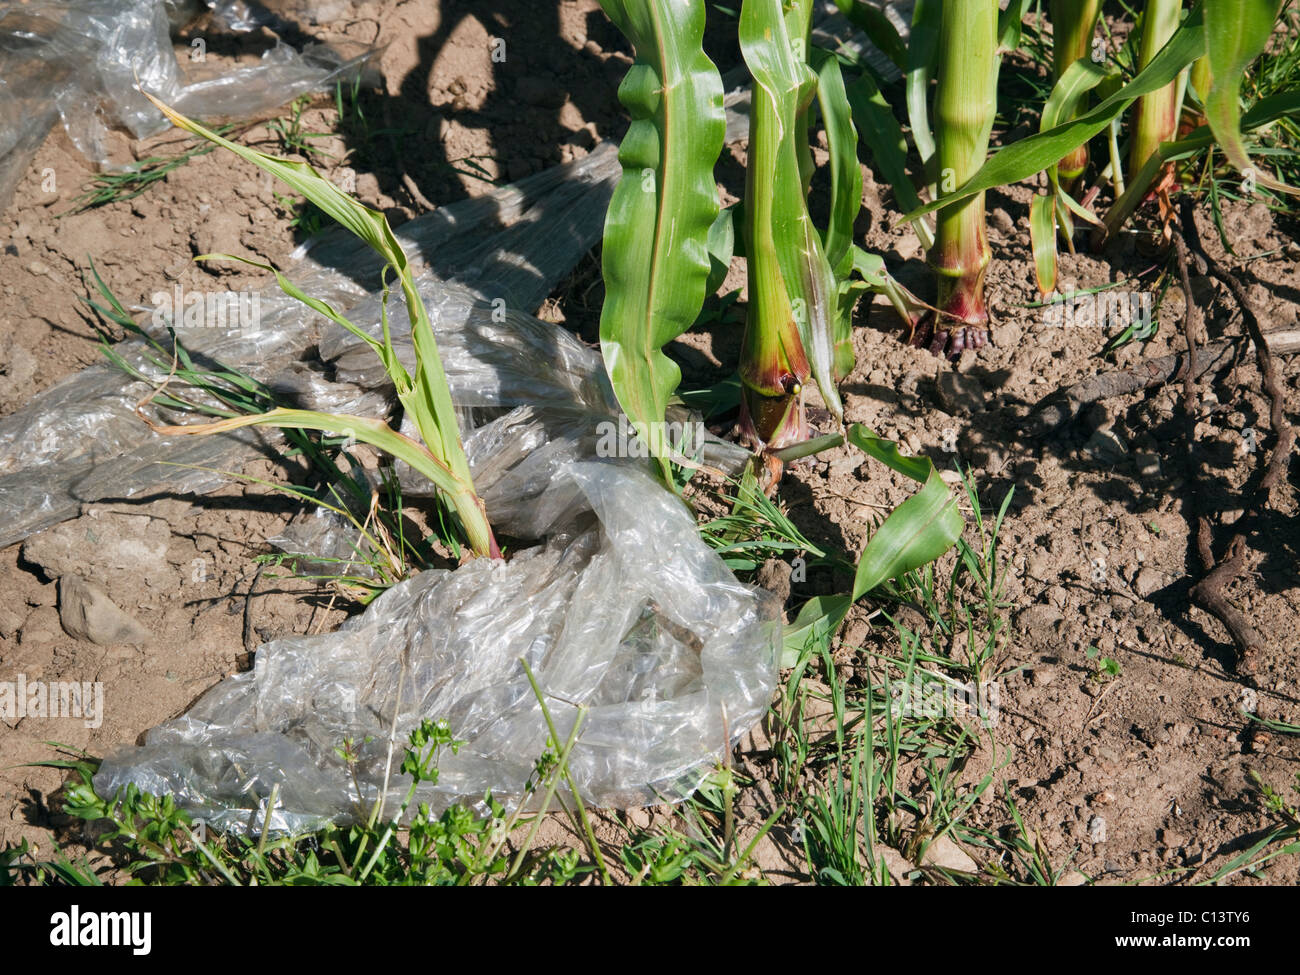 UK, Europe. Maize crop growing through plastic on the soil Stock Photo